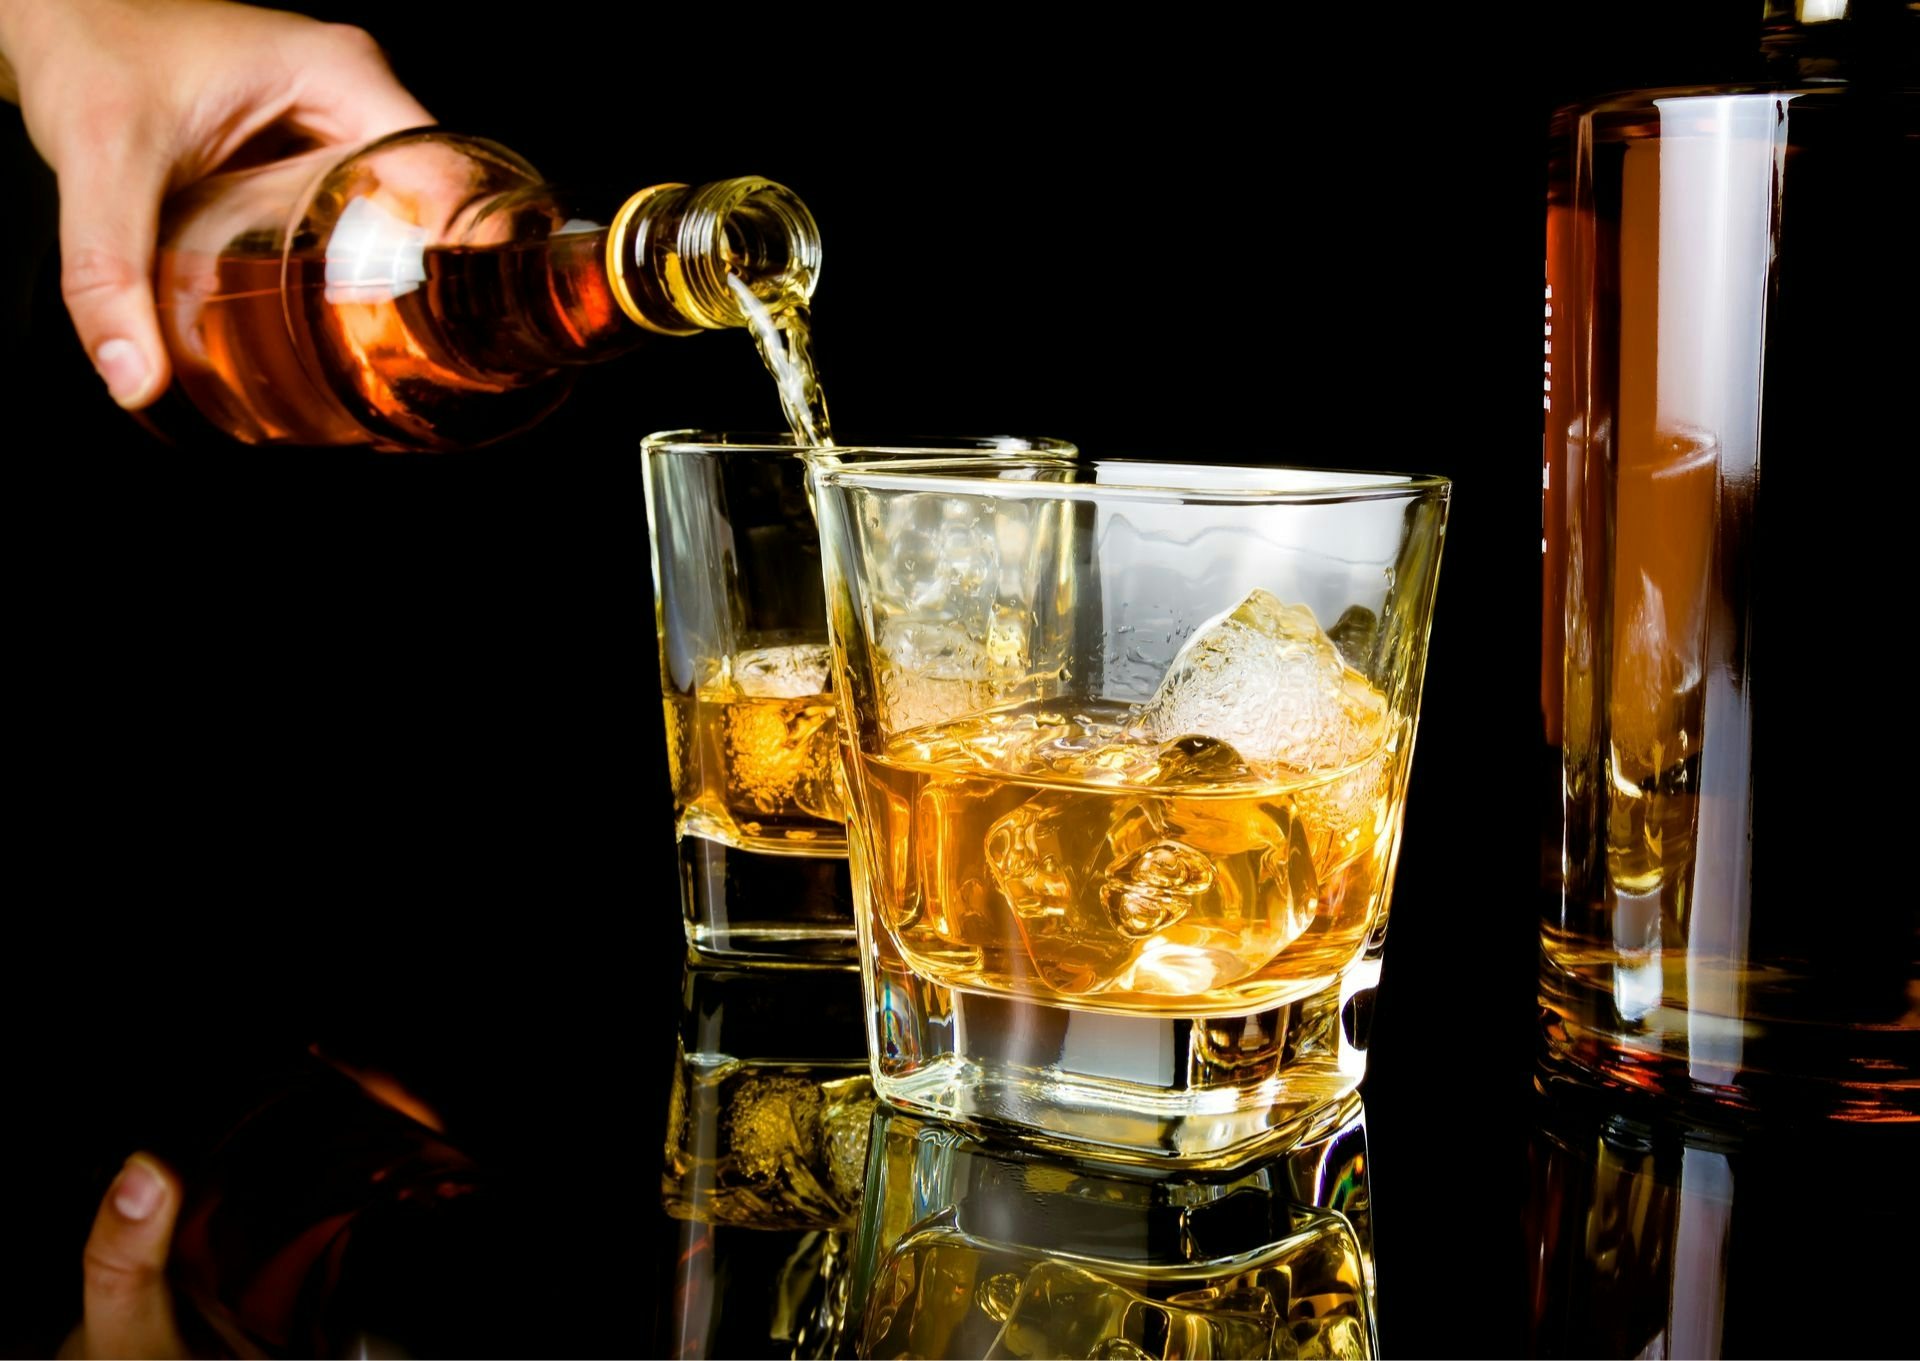 Diageo, the owner of spirits brands like Johnnie Walker and Smirnoff, said that sales of whiskey in China have increased as more consumers want to experience different drinks. Photo: Shutterstock